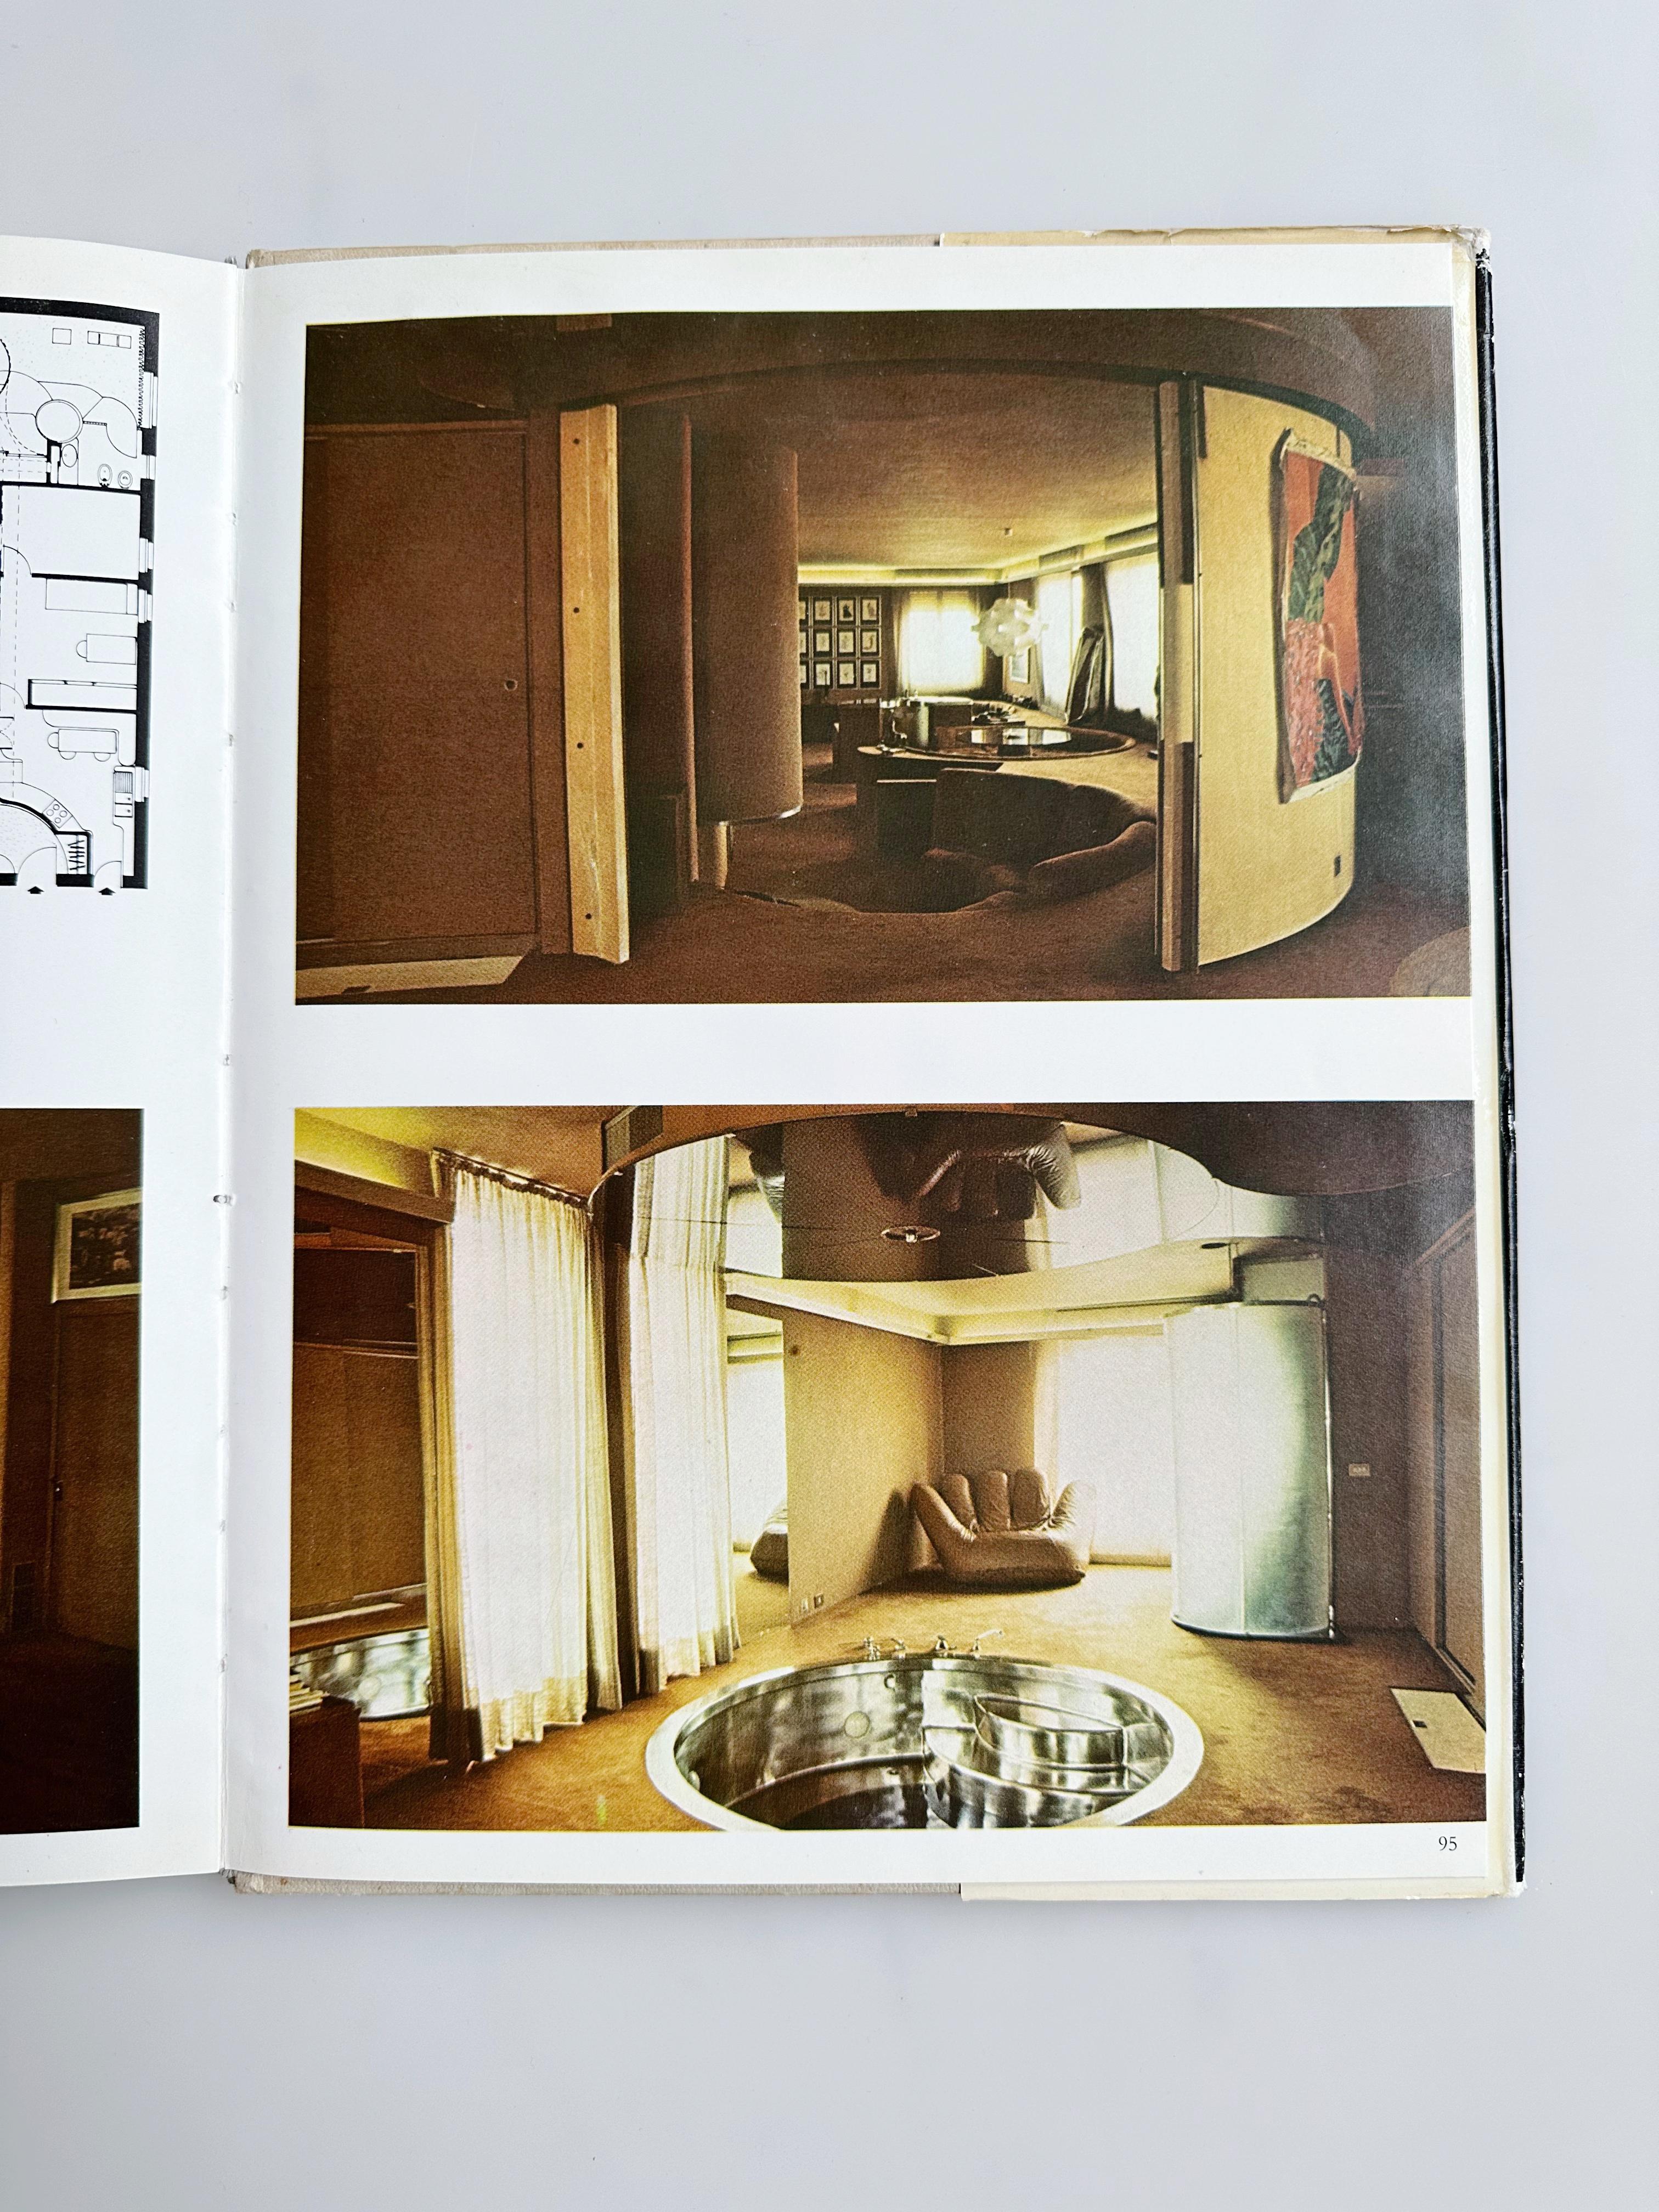 One Room Interiors: 34 Designs From Around The World, 1979 4